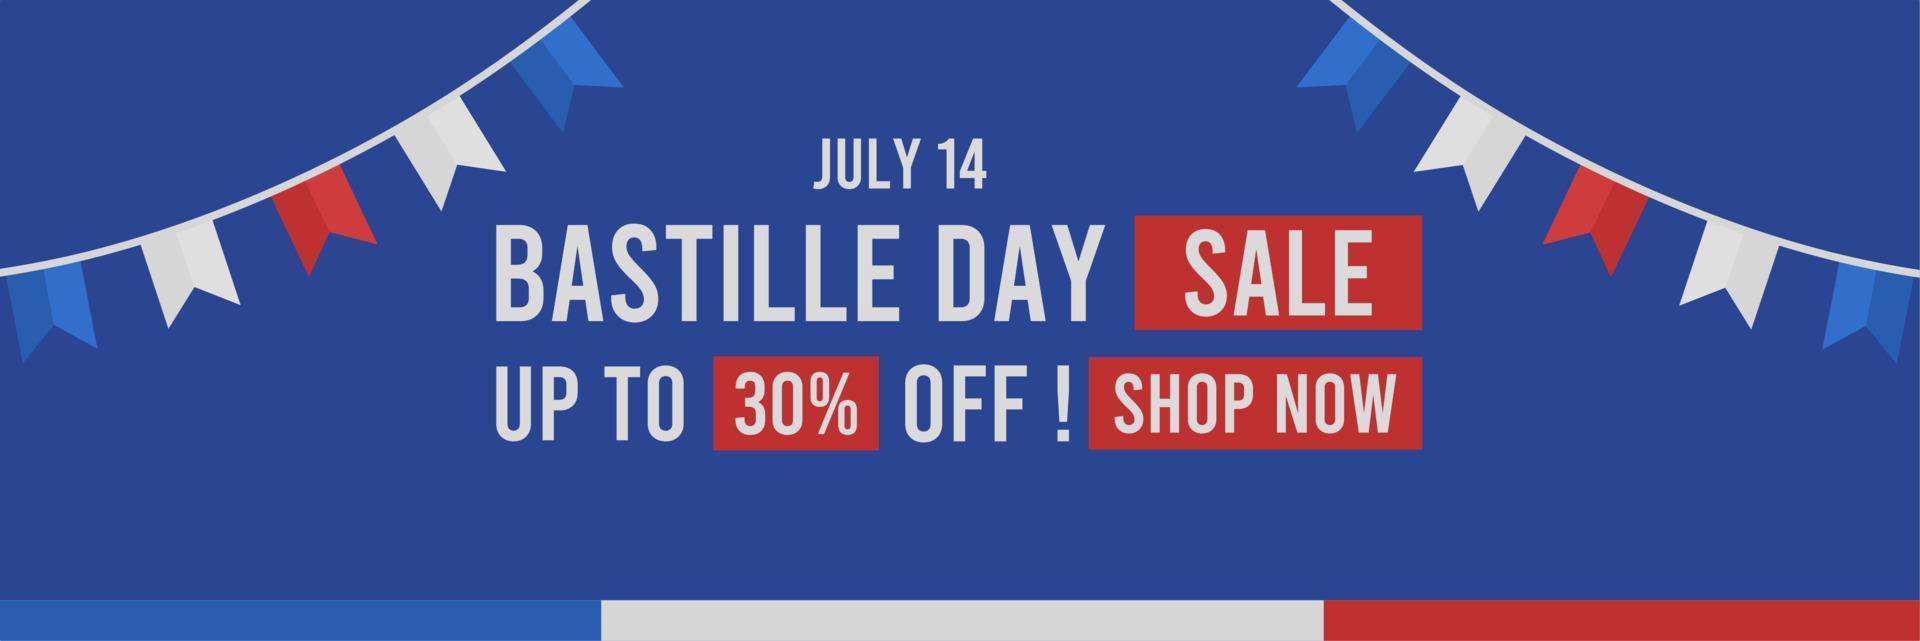 simple and attractive bastille day sales banner for promotions, discounts, marketing, and special offers on july 14 vector